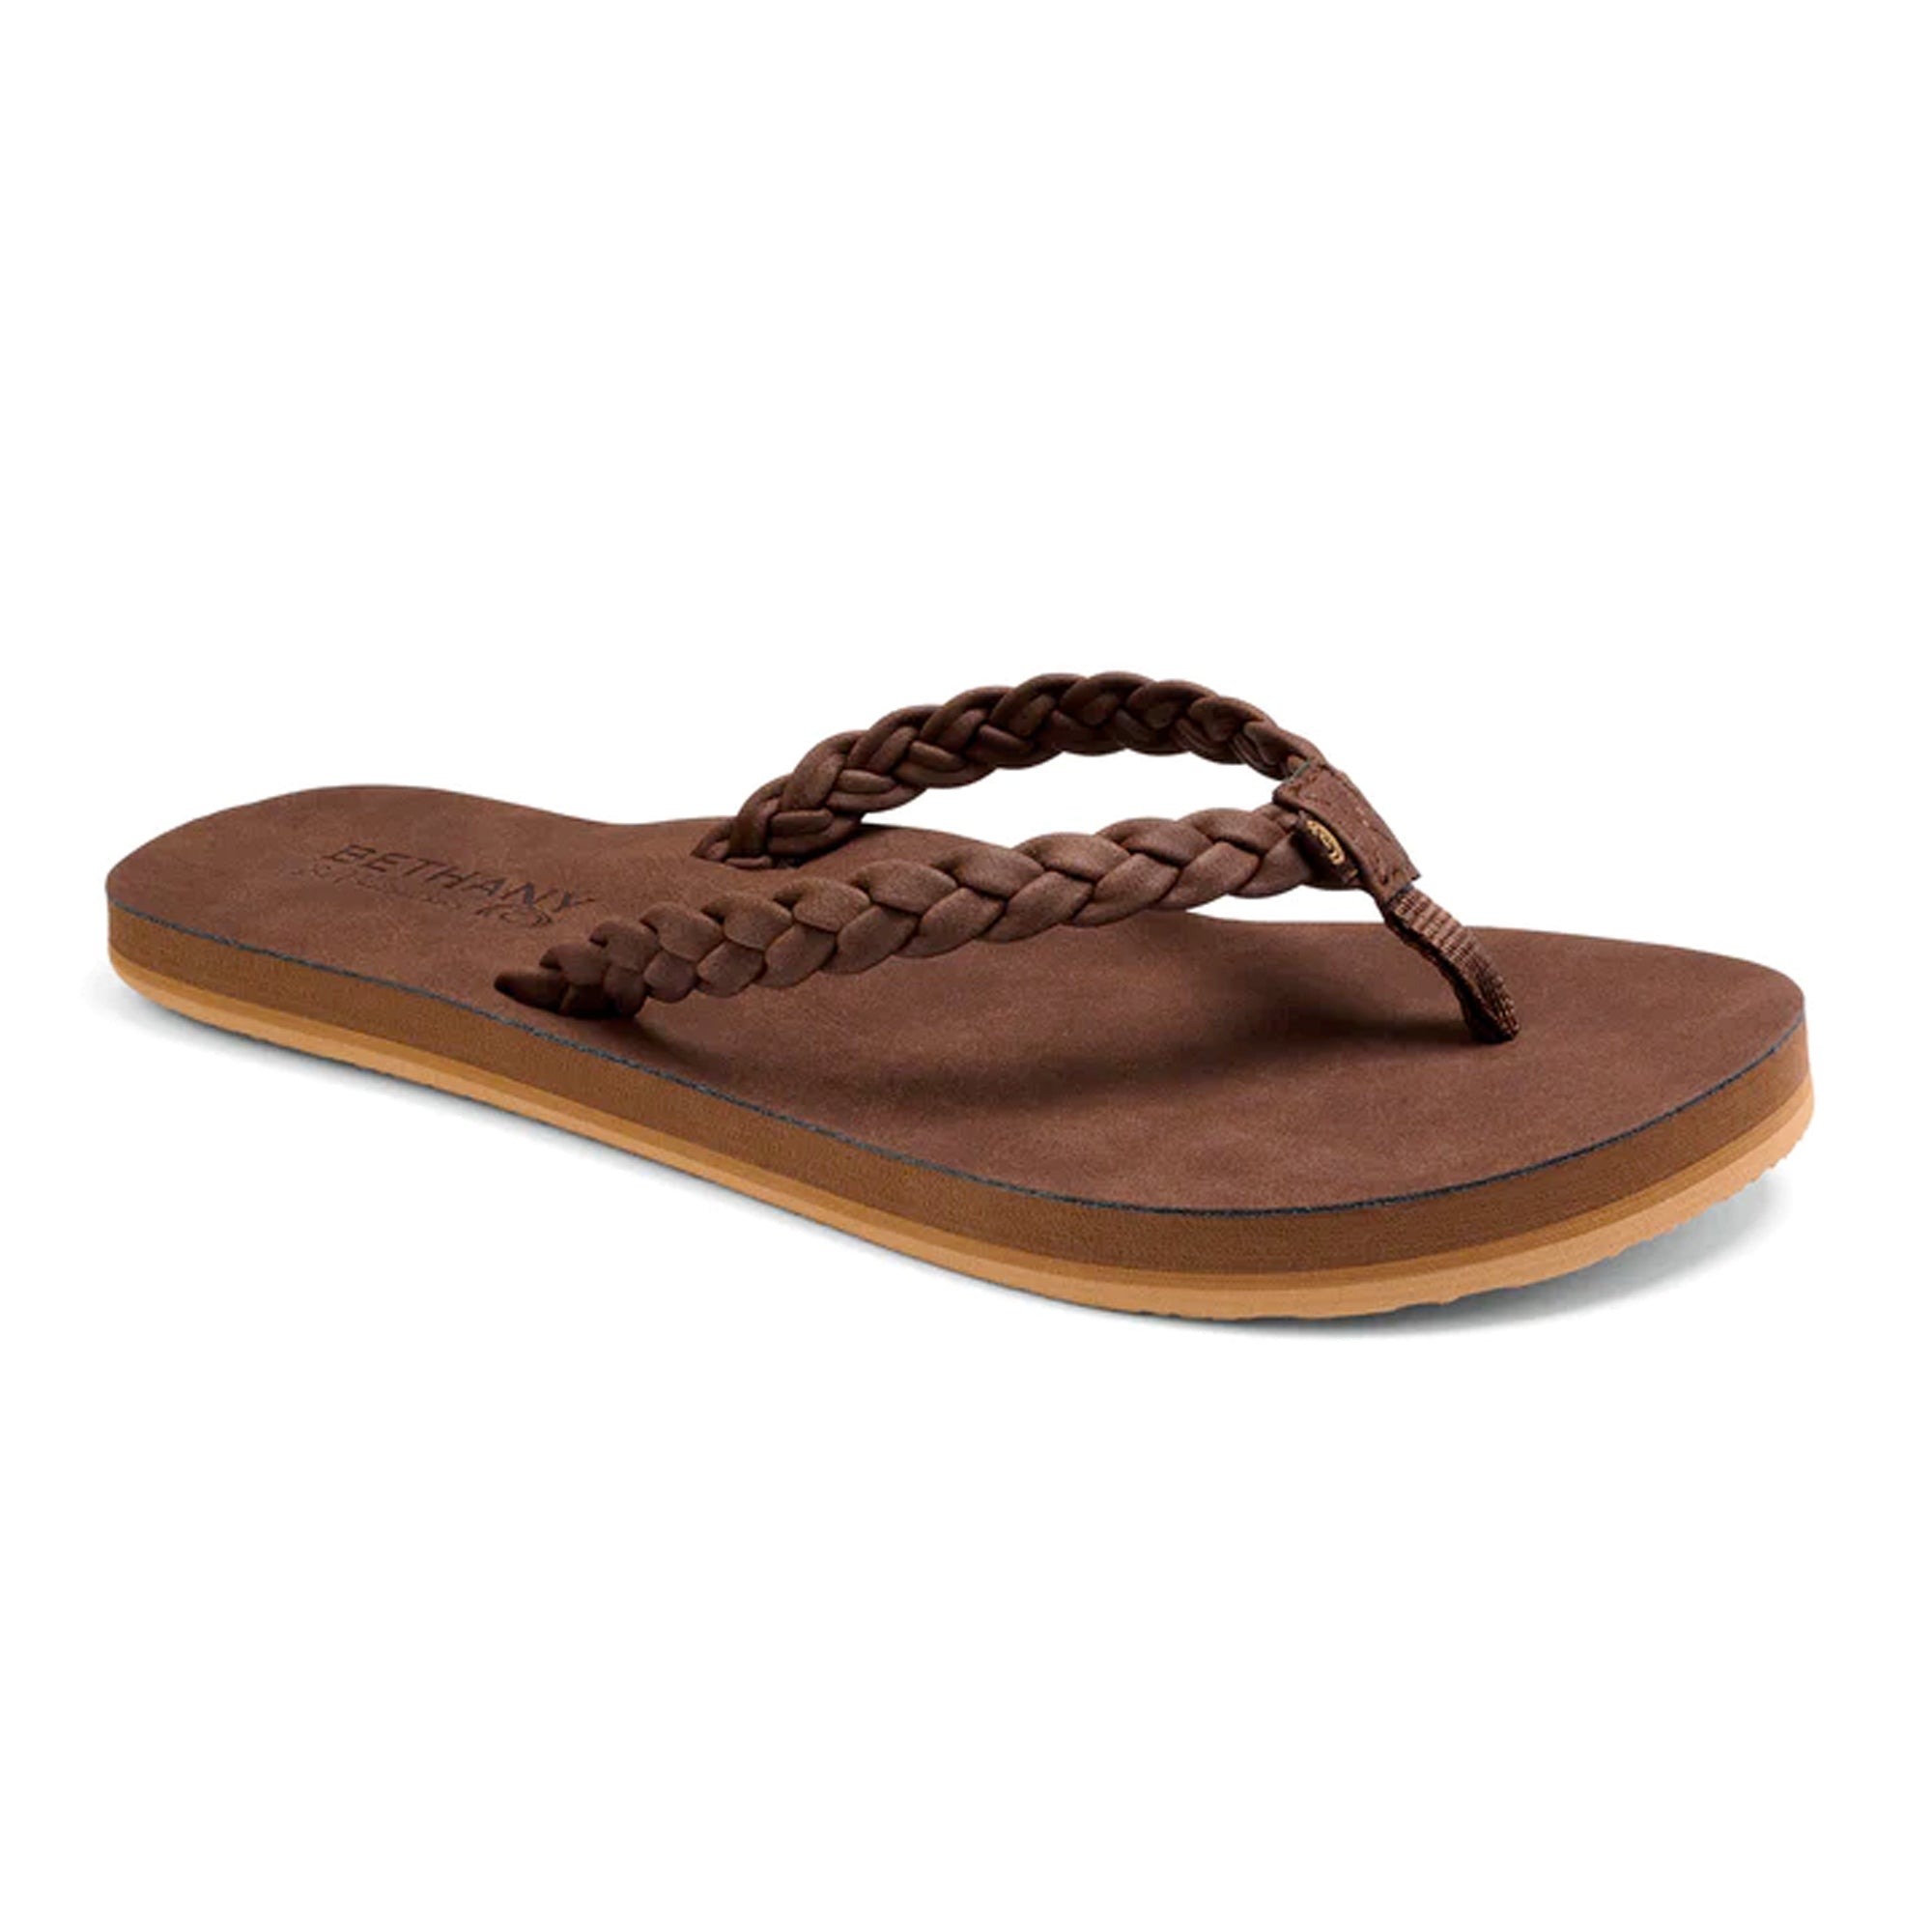 Cobian Bethany Braided Pacifica Women's Sandals